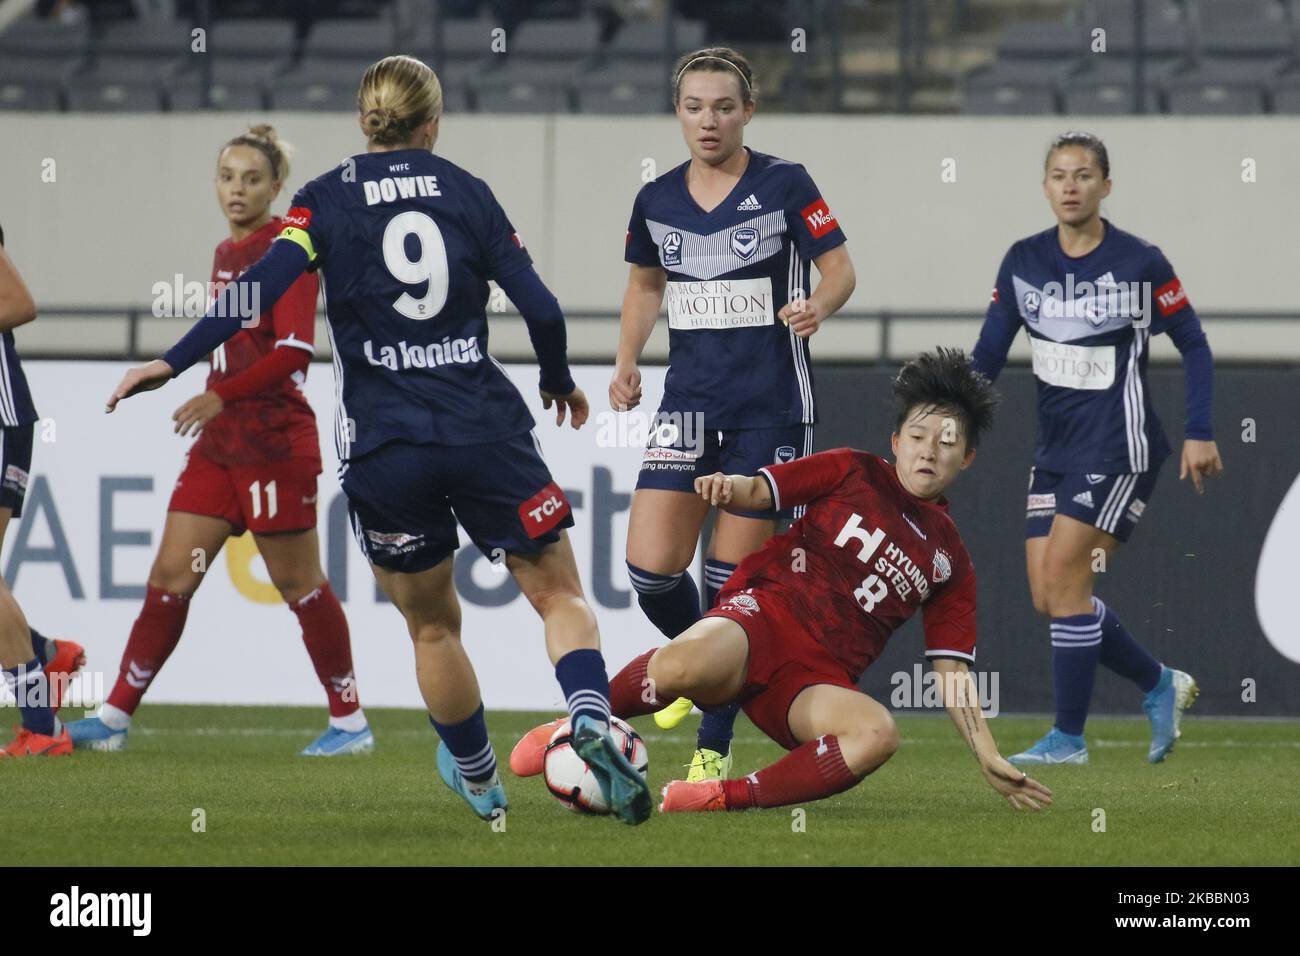 Natasha Dowie of Melbourne Victory and Lee Sodam of Incheon Hyundai Steel Red Angels action during during an Women's Club Championship 2019-FIFA/AFC Pilot Tournamant Melbourne Victory V Incheon Hyundai Steel Red Angels at Yongin Citizens Sports Park in Yongin, South Korea, on November 26, 2019. Match Won Incheon Hyundai Steel Red Angels, Score by 4-0. (Photo by Seung-il Ryu/NurPhoto) Stock Photo